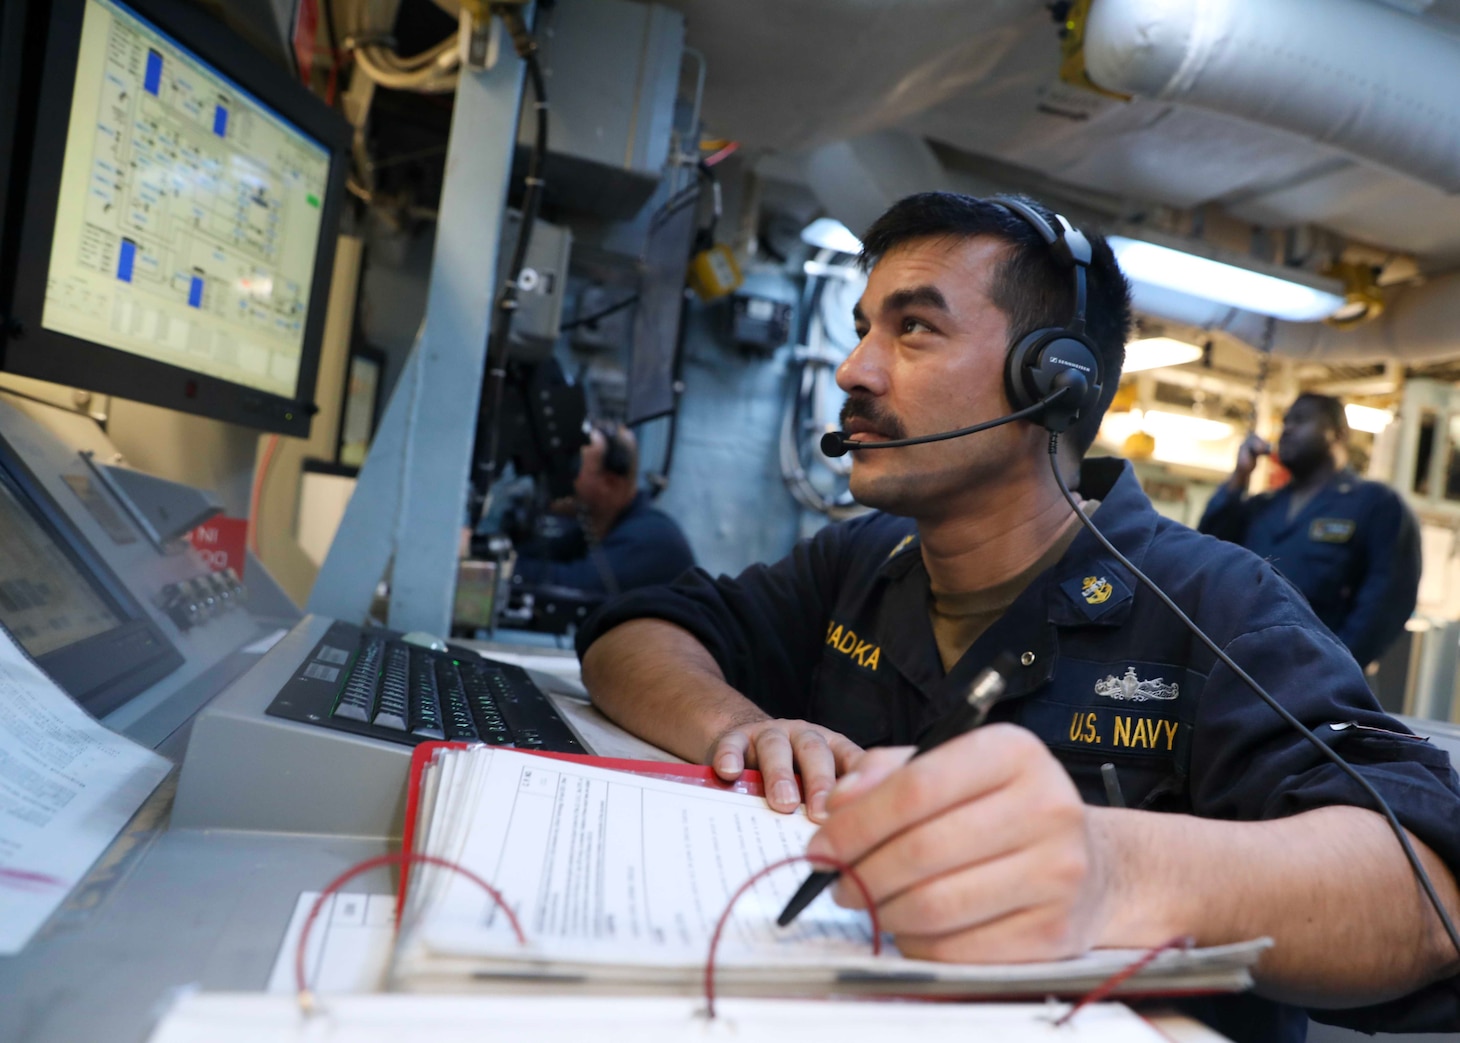 SOUTH CHINA SEA (March 24, 2023) – Chief Gas Turbine Systems Technician (Electrical) Khadka Prabhat, from Nepal, stands watch in the central control station aboard the Arleigh Burke-class guided-missile destroyer USS Milius (DDG 69) while conducting routine underway operations. Milius is forward-deployed to the U.S. 7th Fleet area of operations in support of a free and open Indo-Pacific. (U.S. Navy photo by Mass Communication Specialist 1st Class Greg Johnson)